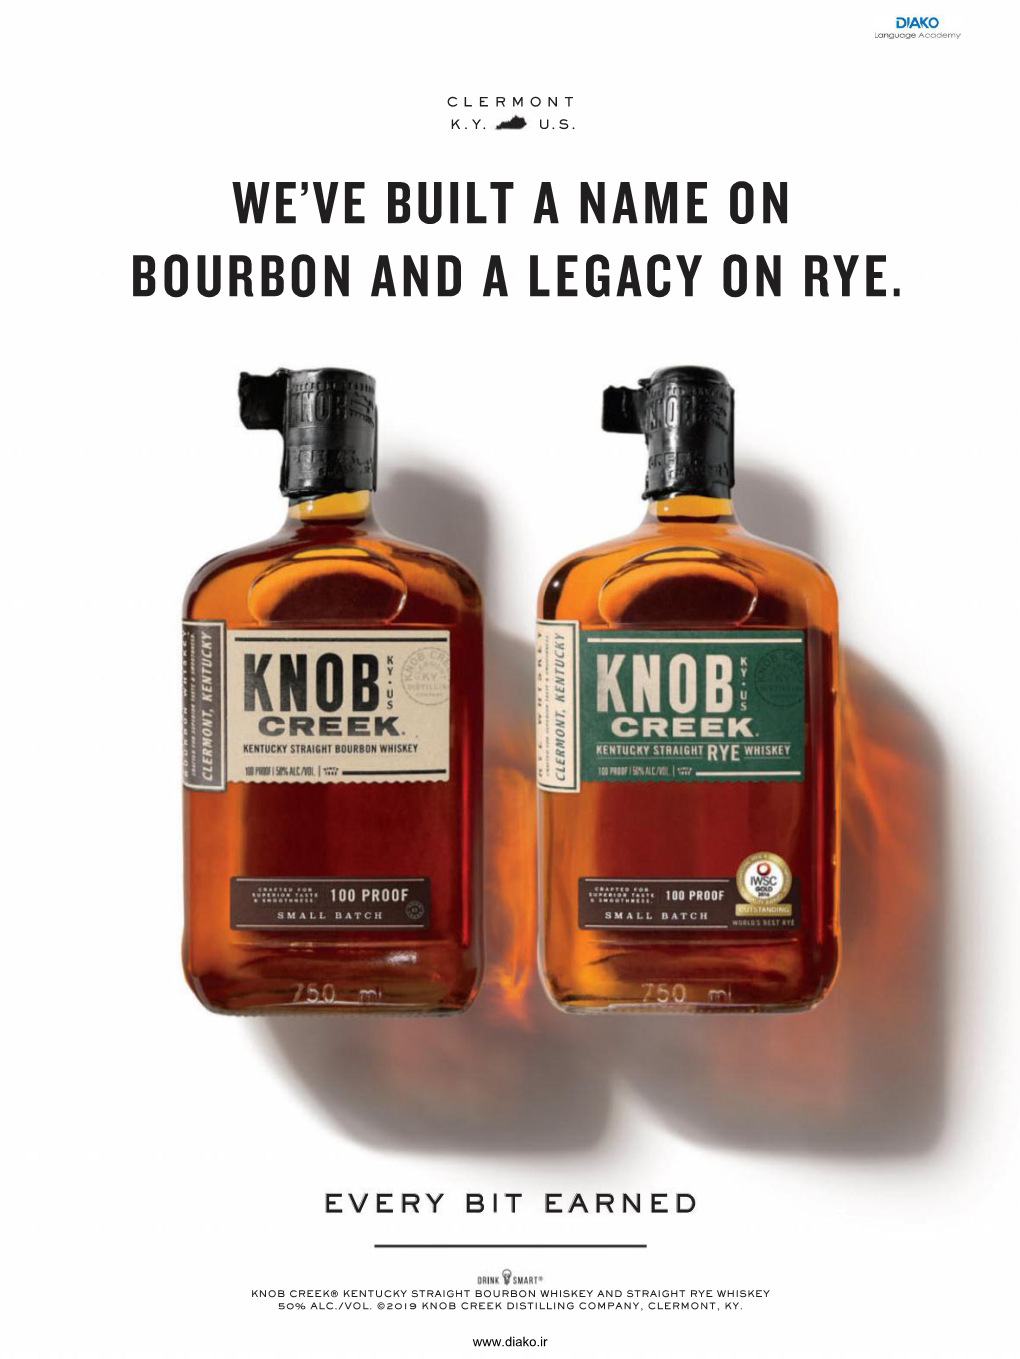 We've Built a Name on Bourbon and a Legacy on Rye